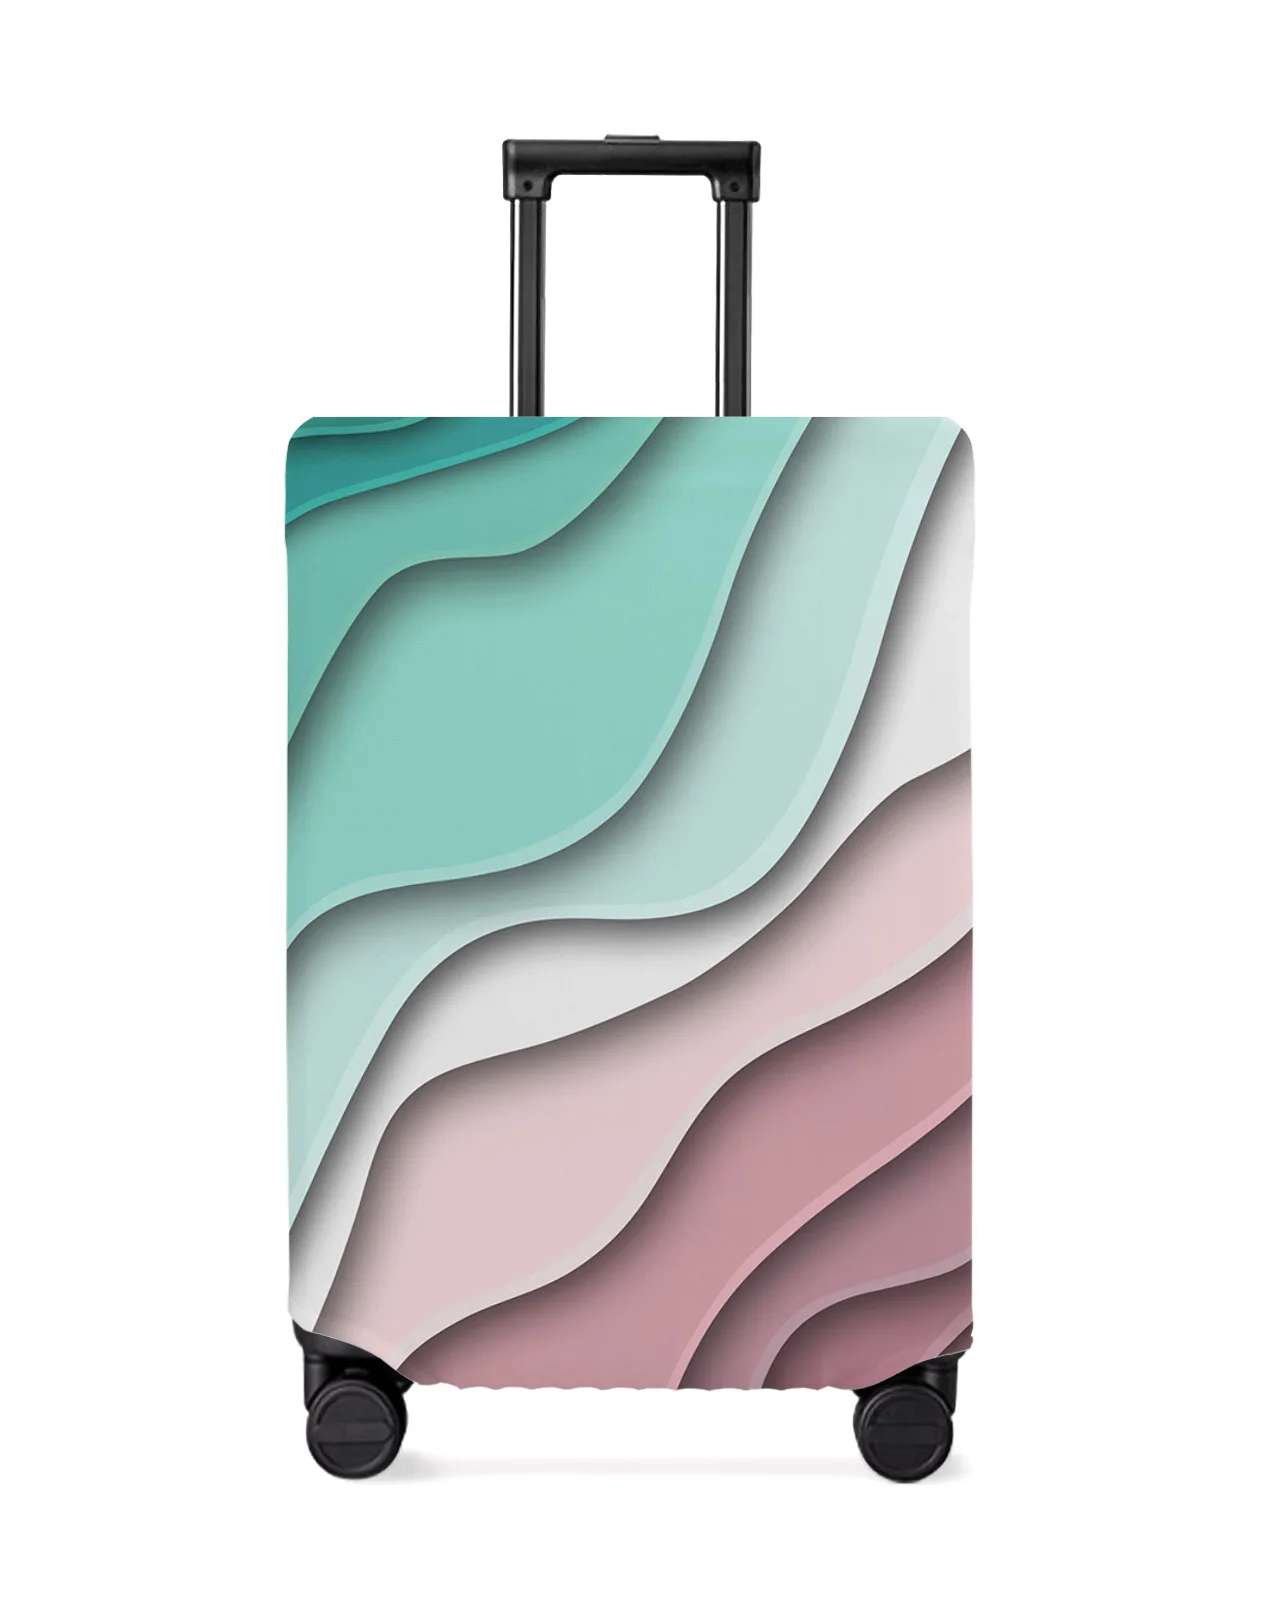 green-gradient-dark-red-modern-geometric-travel-luggage-cover-elastic-baggage-cover-suitcase-case-dust-cover-travel-accessories